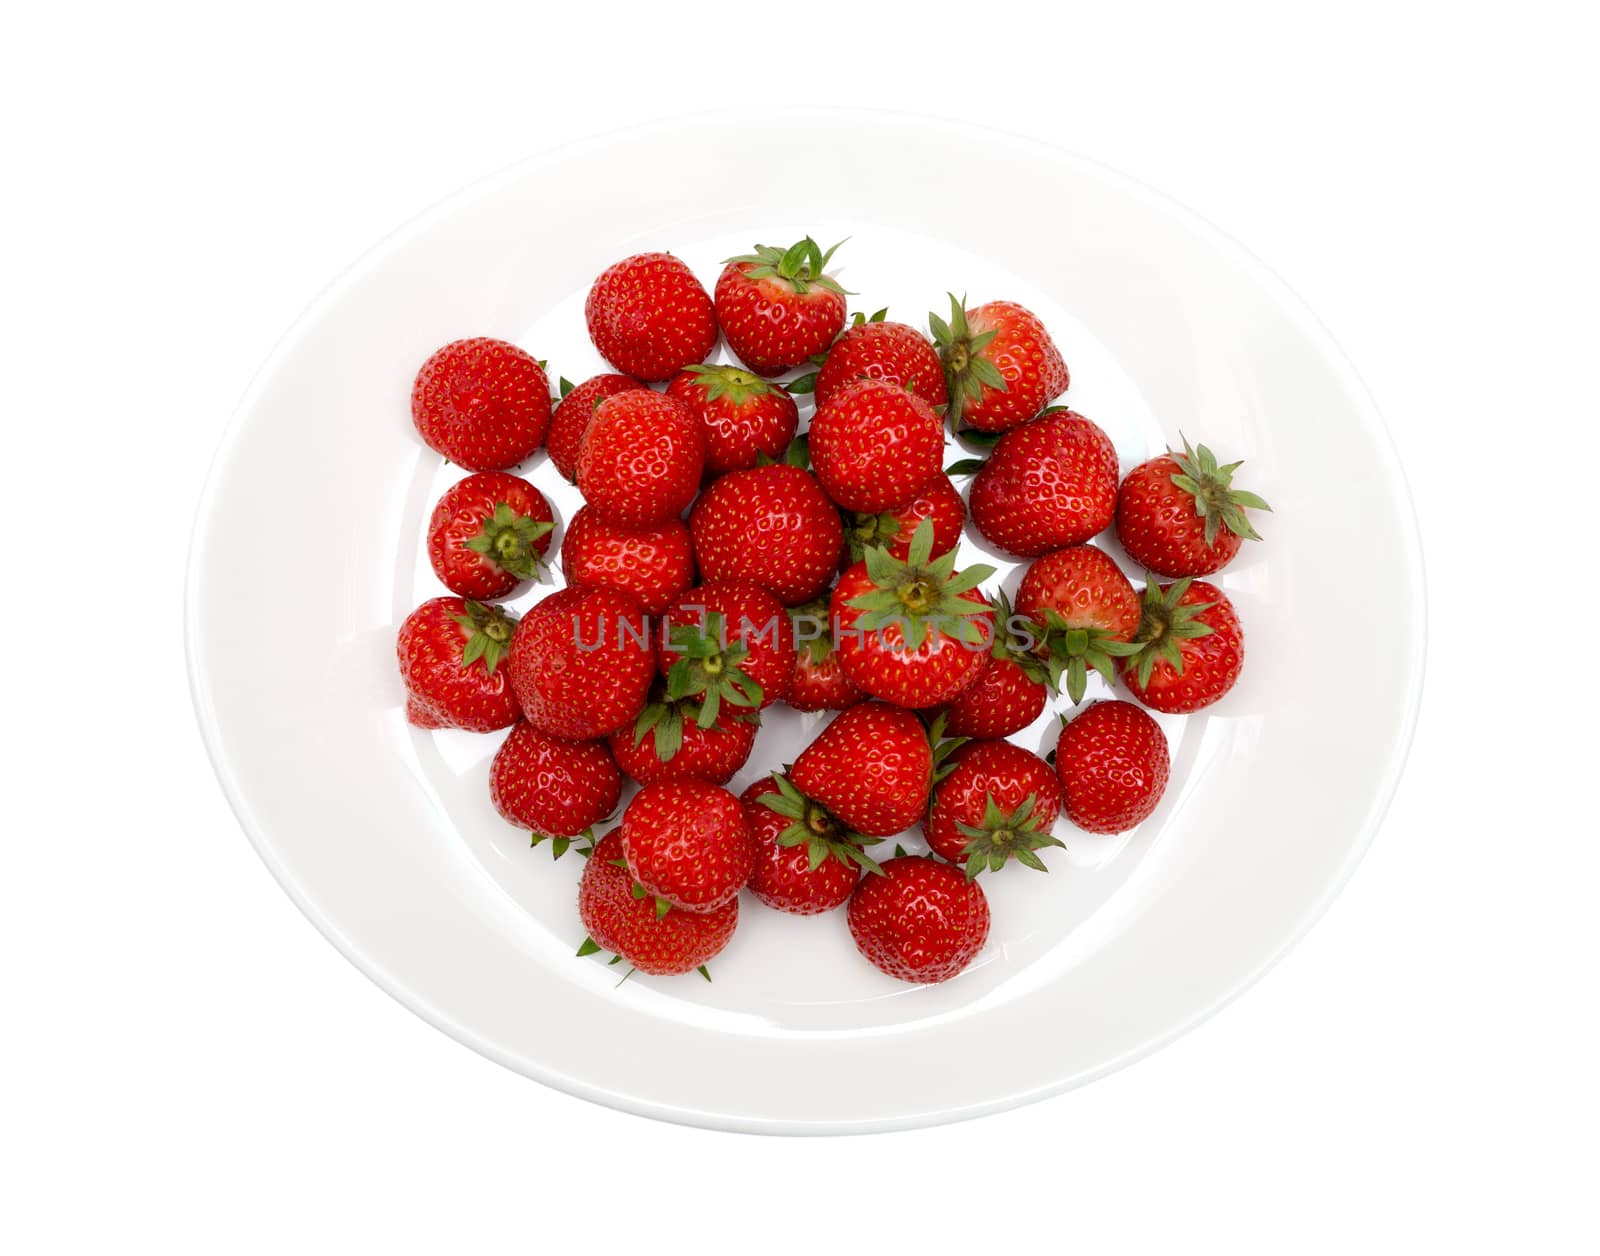 fresh garden strawberries on a white plate, top view by DNKSTUDIO